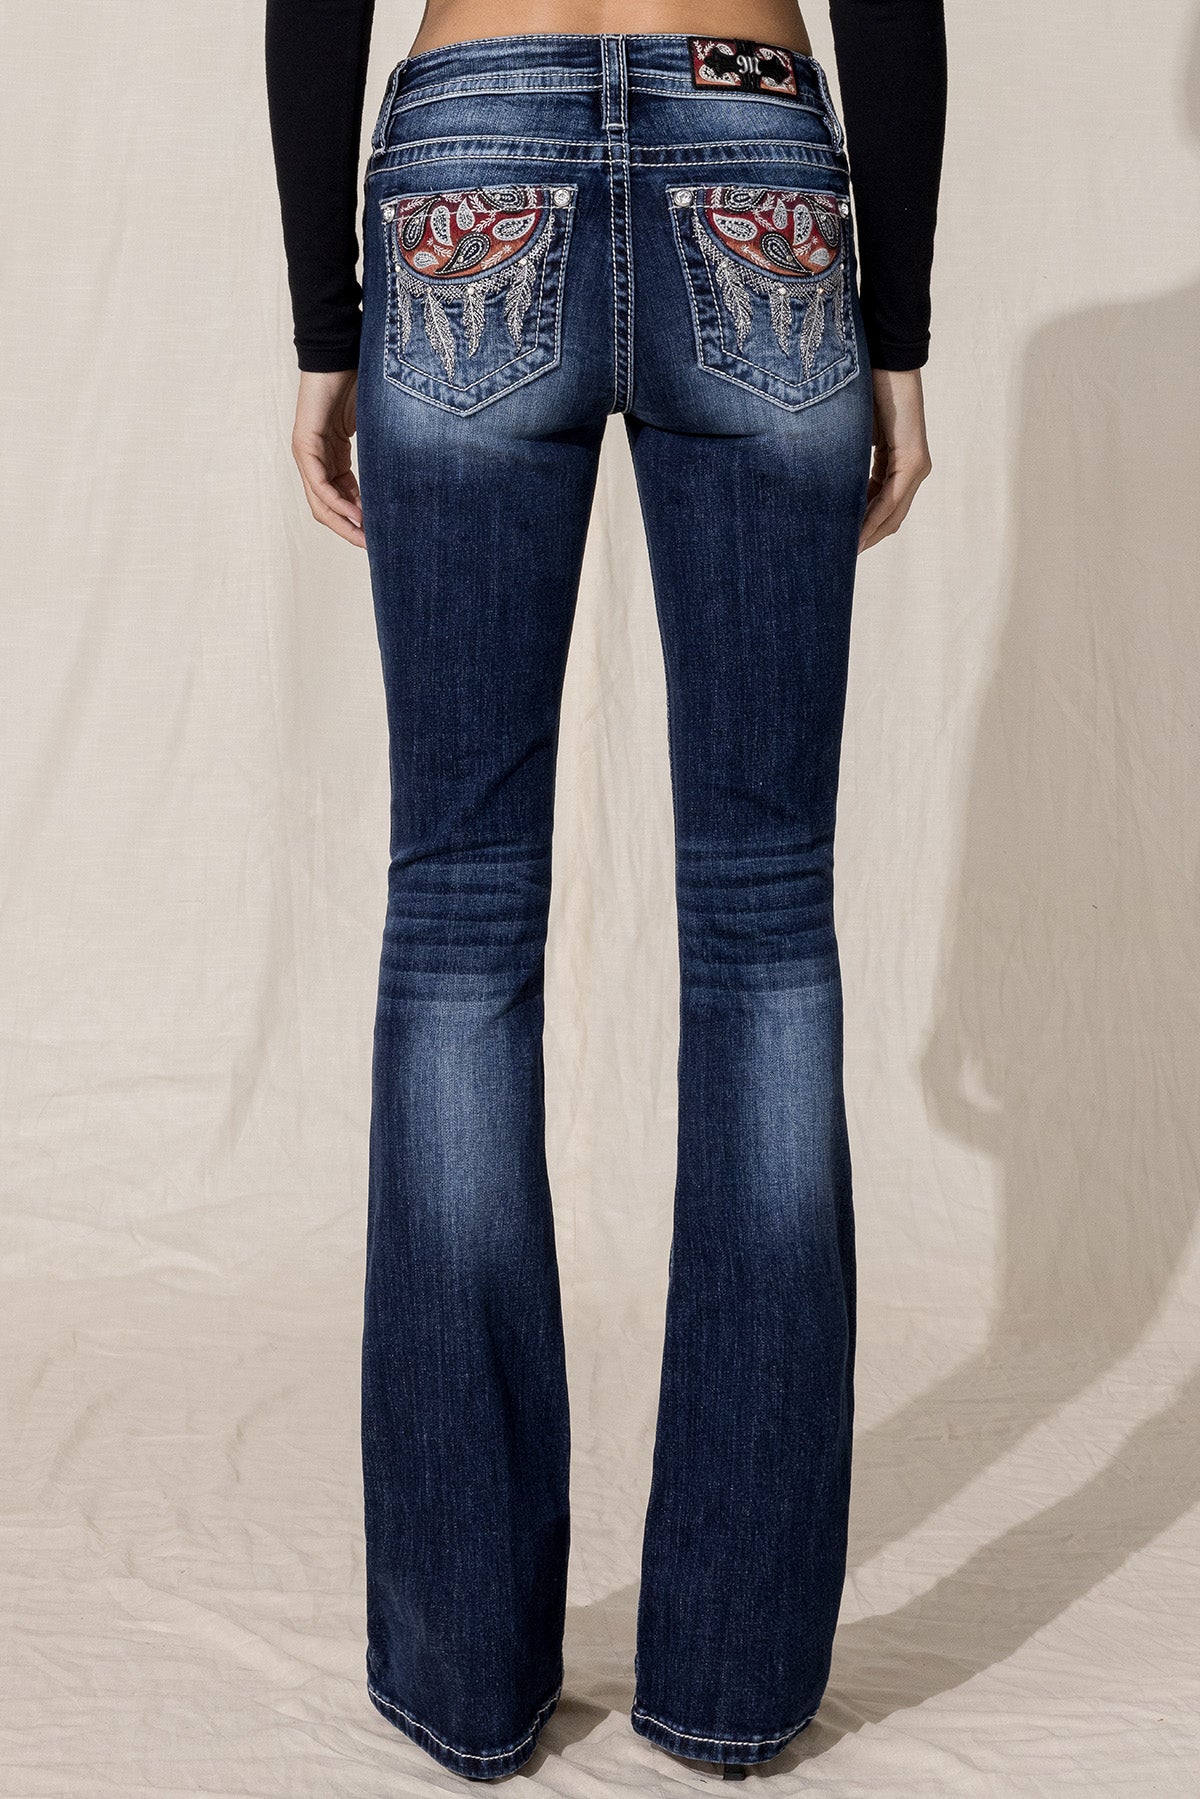 Paisley Dreaming Bootcut Jean | Only $101.15 | Blue | Miss Me